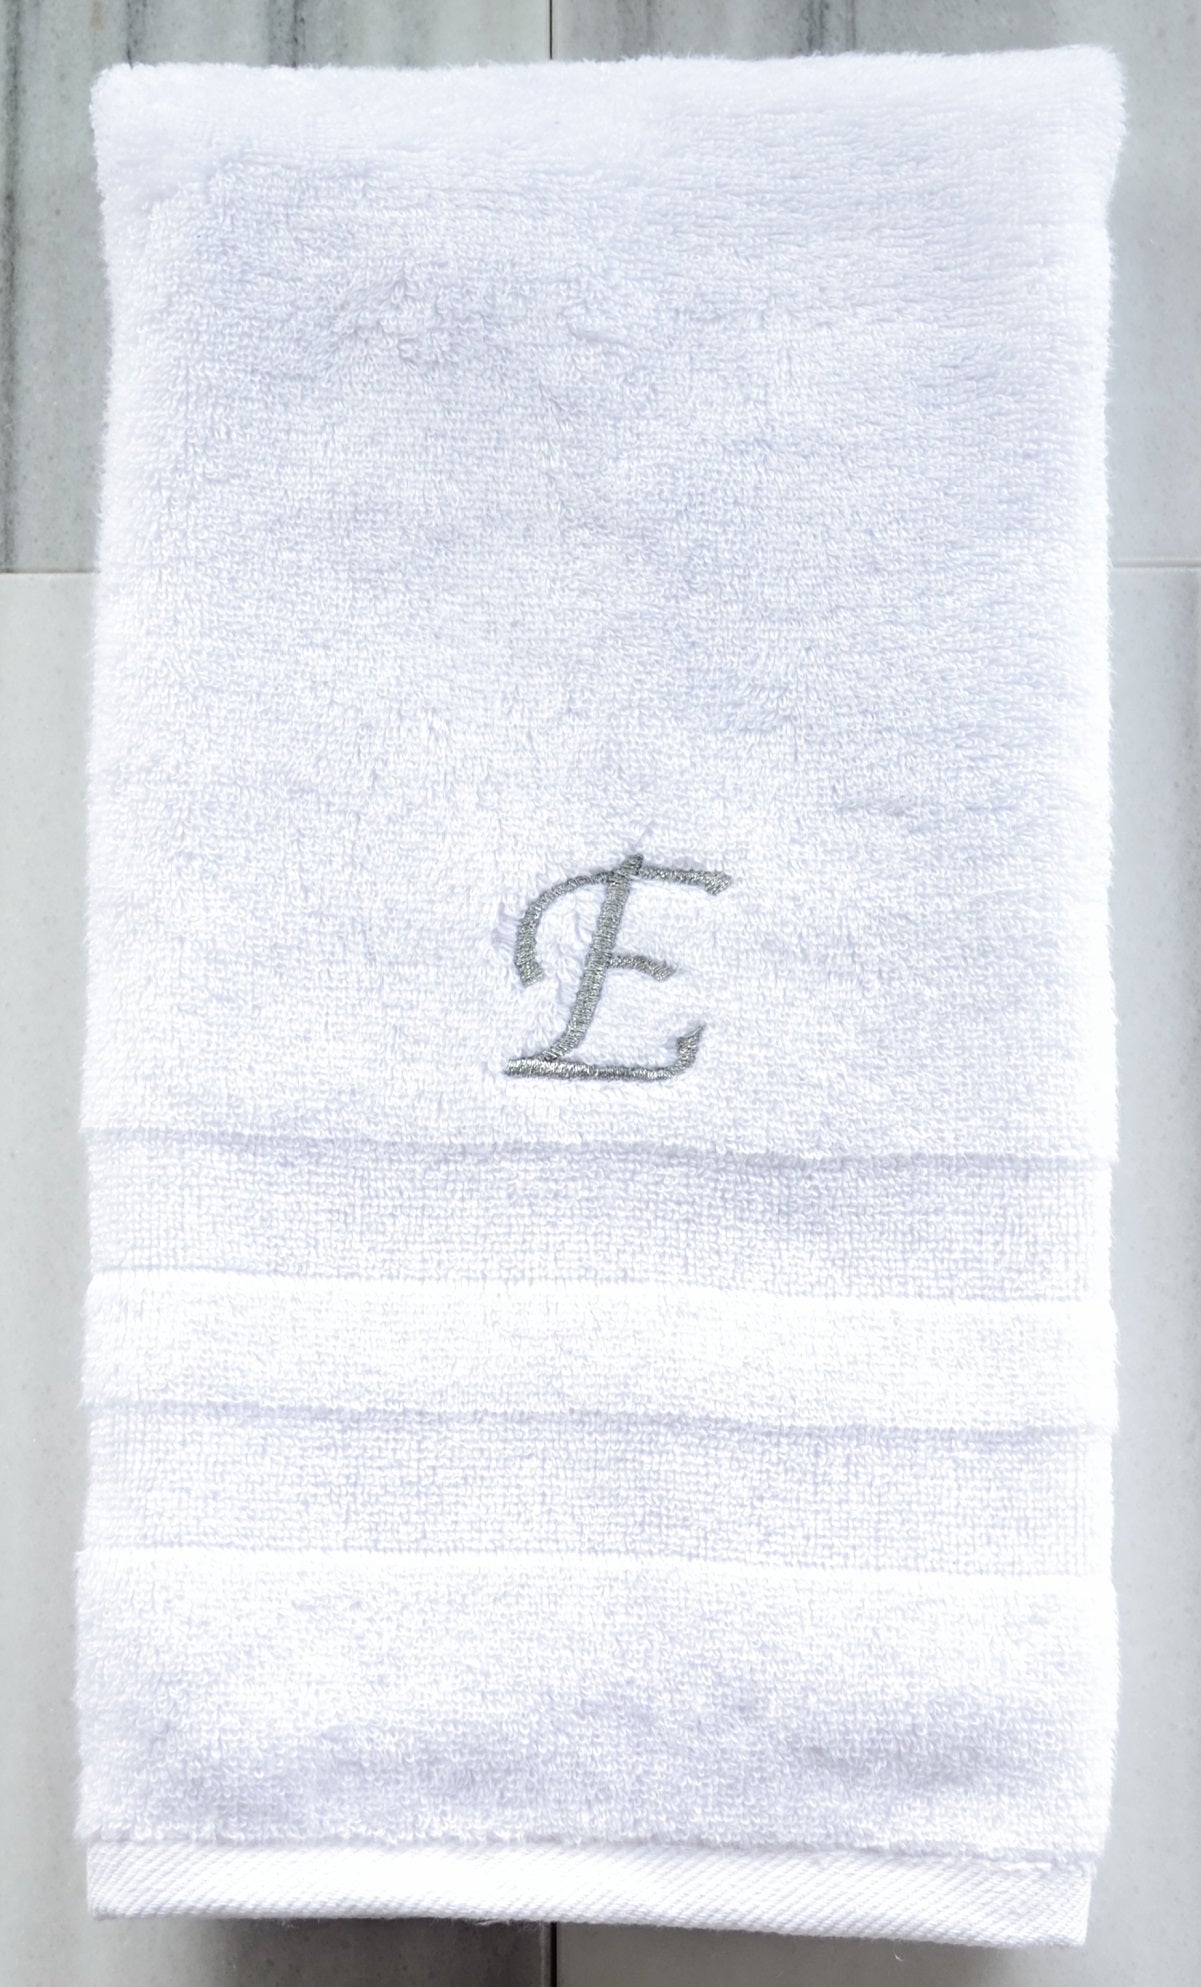 Monogrammed Ritz Towels - White - Set of 6